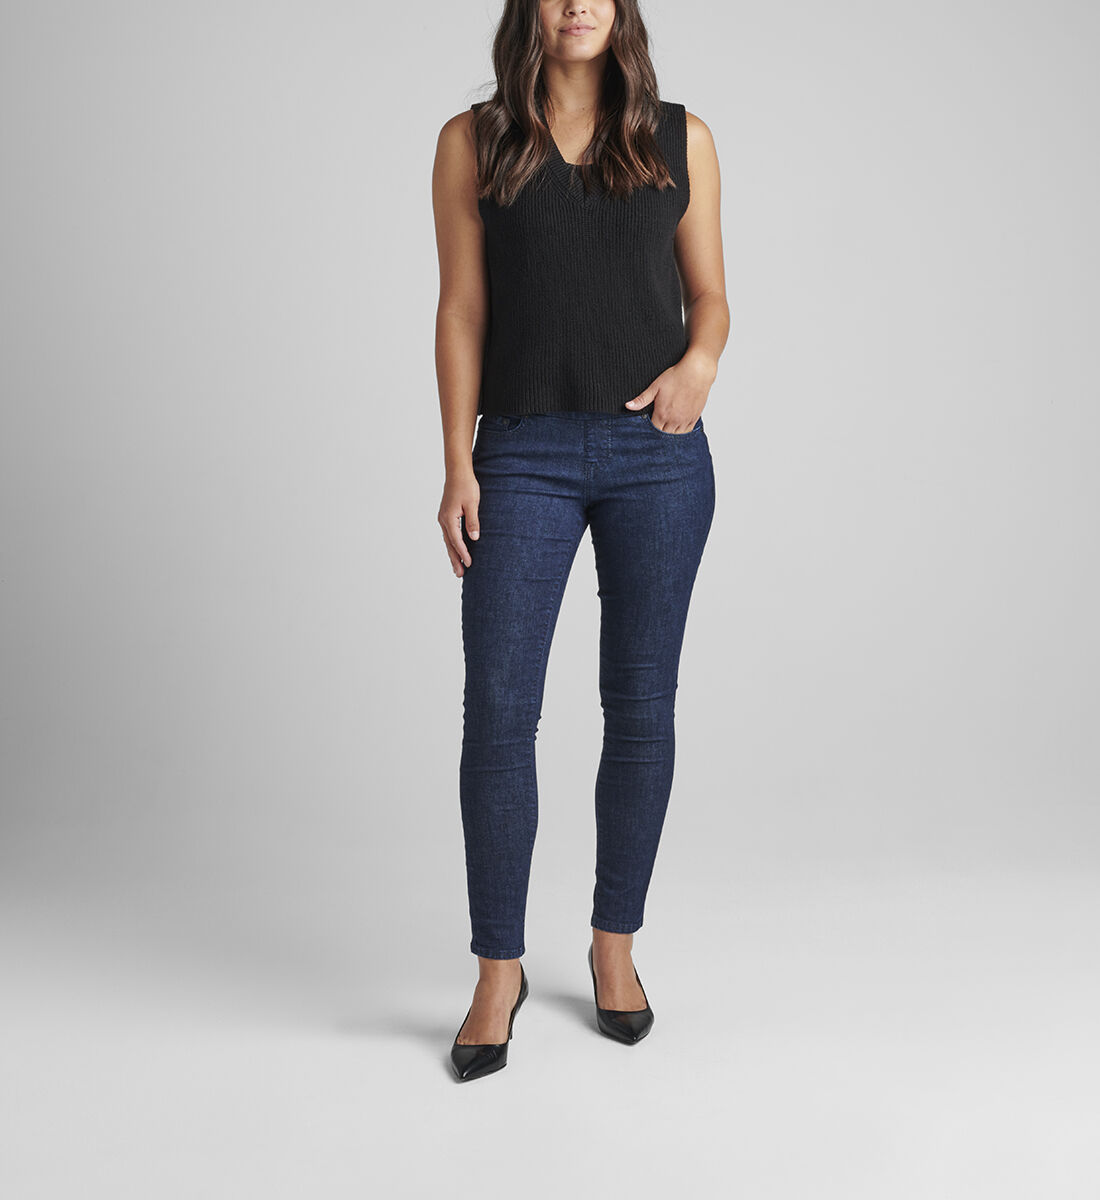 Nora Mid Rise Skinny Pull-On Jeans Petite Front